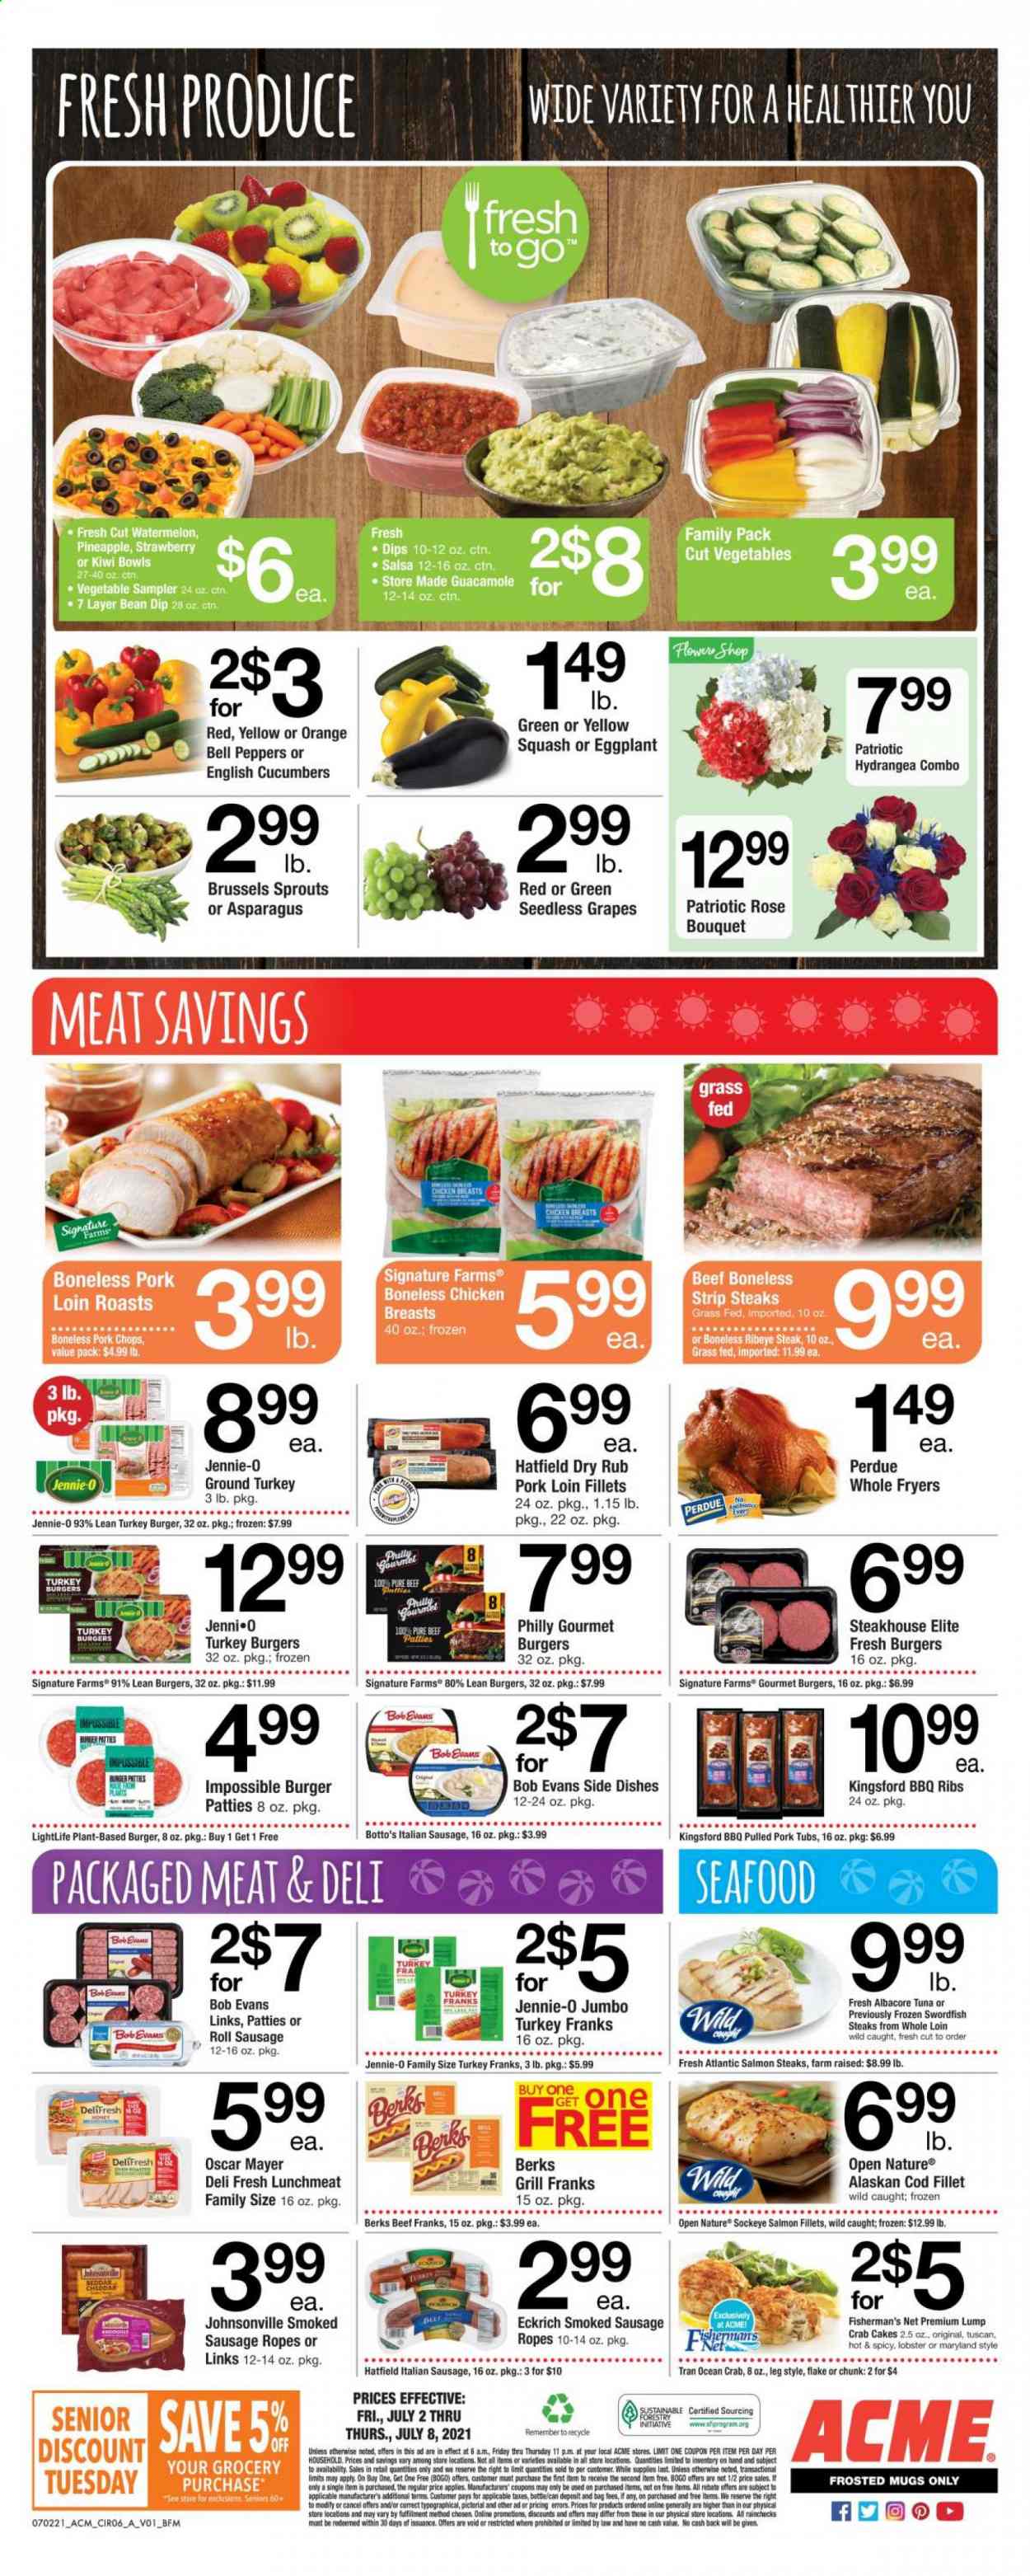 thumbnail - ACME Flyer - 07/02/2021 - 07/08/2021 - Sales products - seedless grapes, asparagus, bell peppers, cucumber, peppers, eggplant, brussel sprouts, yellow squash, grapes, kiwi, watermelon, pineapple, oranges, cod, lobster, salmon, salmon fillet, swordfish, tuna, alaskan cod fillet, seafood, crab cake, hamburger, Perdue®, Bob Evans, pulled pork, Johnsonville, Oscar Mayer, smoked sausage, italian sausage, guacamole, lunch meat, dip, salsa, wine, rosé wine, ground turkey, chicken breasts, beef meat, beef steak, steak, ribeye steak, striploin steak, burger patties, turkey burger, pork chops, pork loin, pork meat, bag. Page 7.